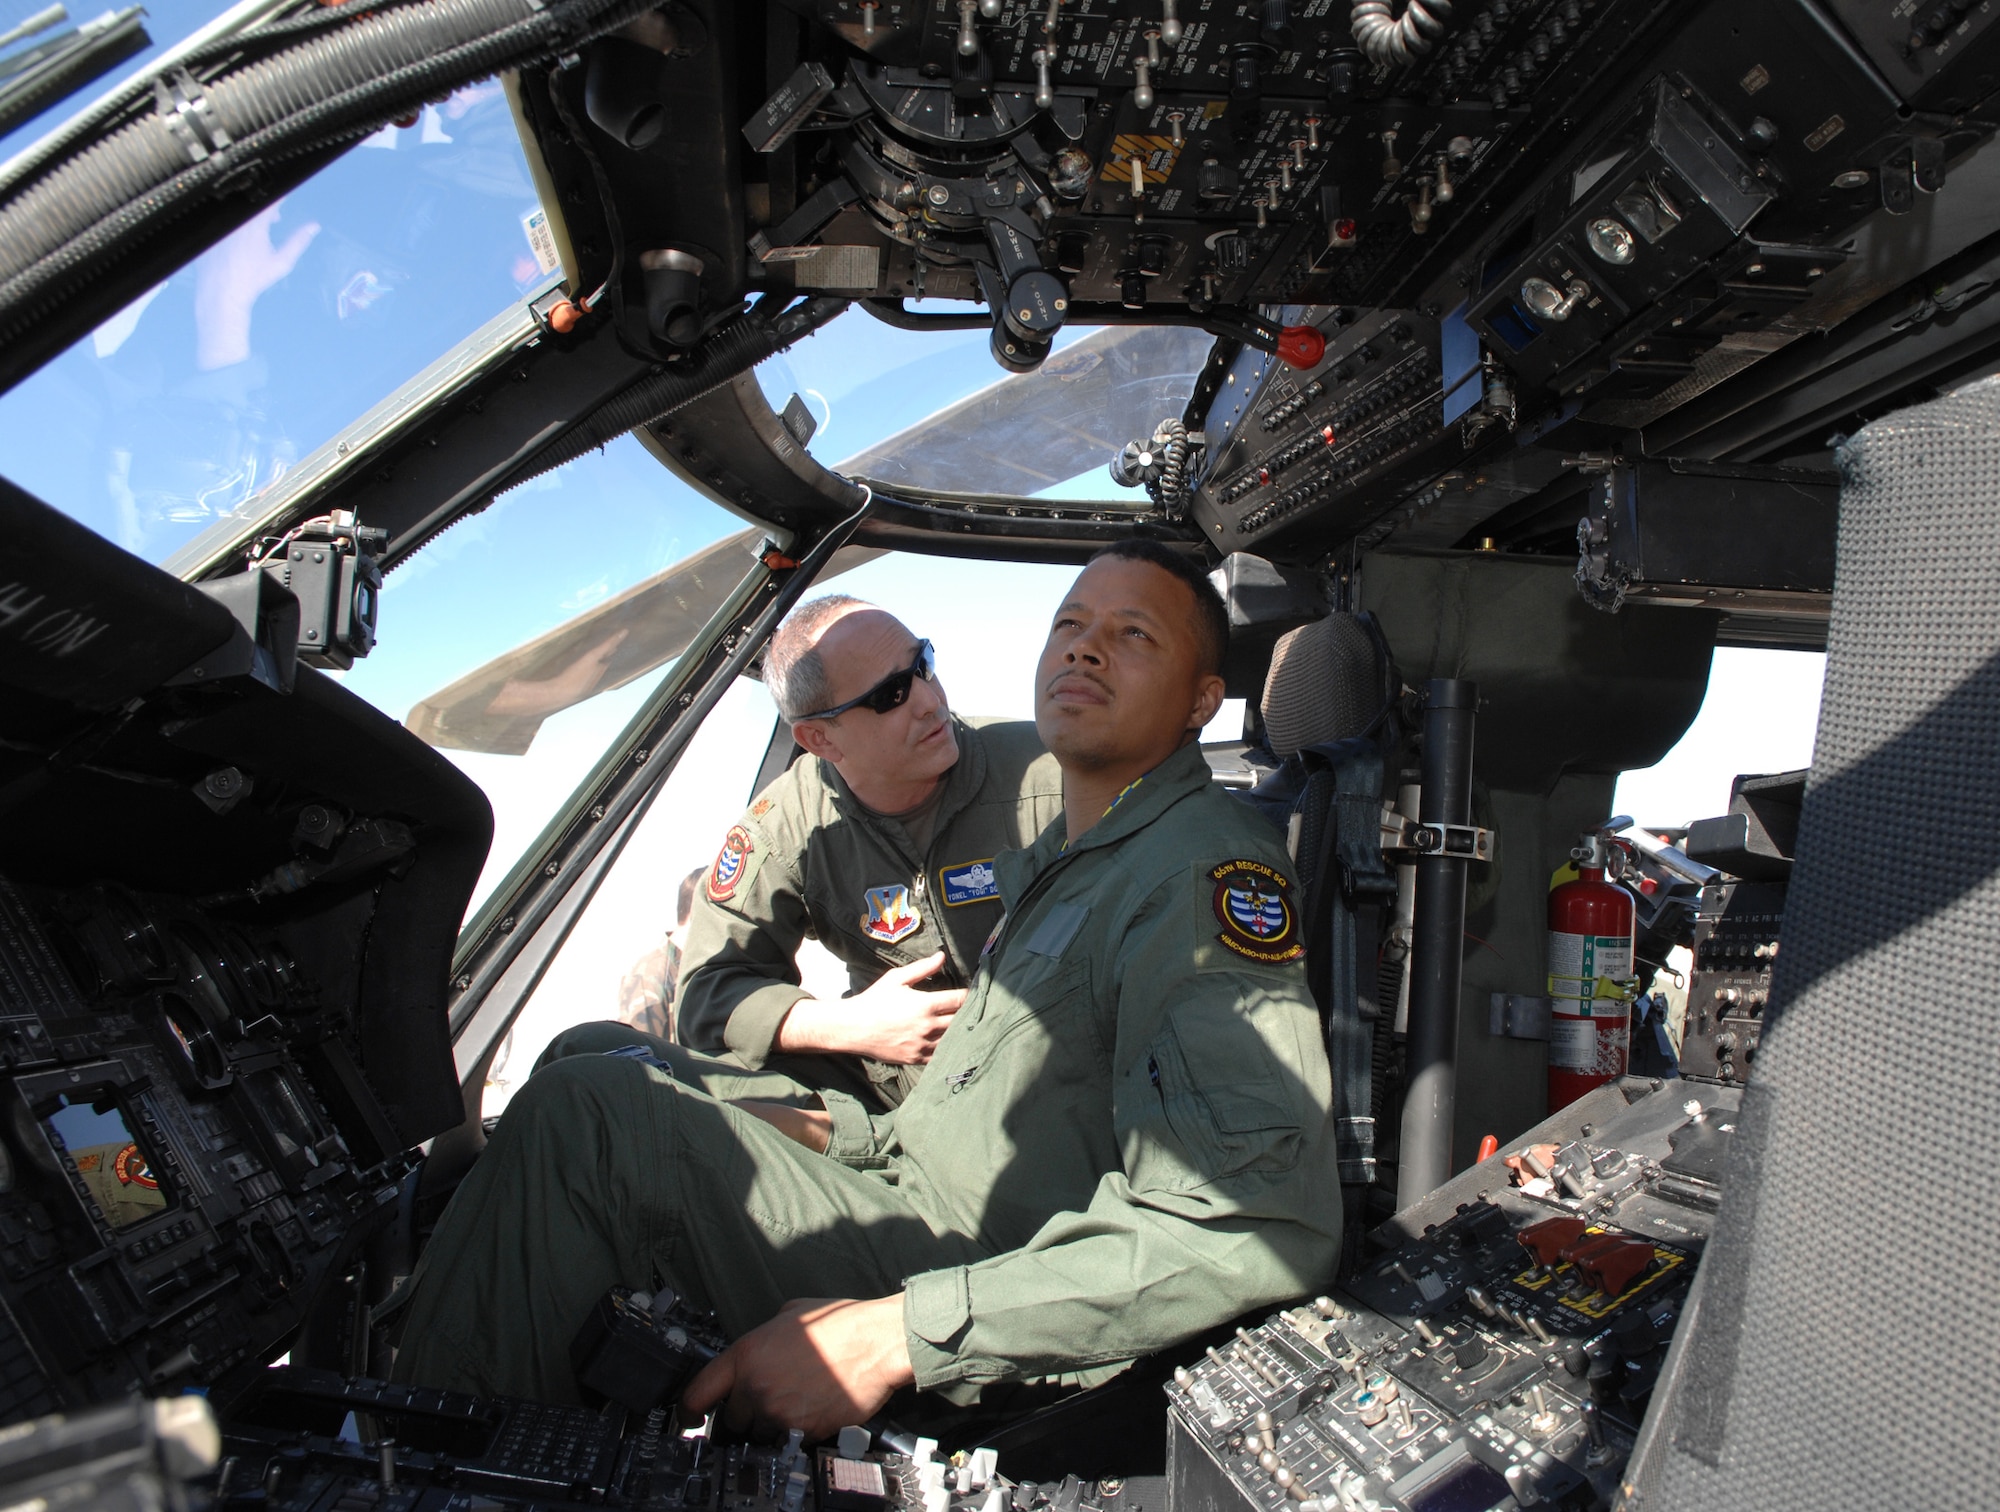 Maj. Yonel "Yogi" Dorelis, 66th Rescue Squadron pilot, briefs Oscar-nominated actor Terrence Howard on the HH-60G helicopter at Nellis Air Force Base, Nev. on March 16. Mr. Howard will be starring in  “Iron Man,” which begins filming soon. The U.S. Air Force will be depicted in a number of scenes in the film. (U.S. Air Force photo by Tech. Sgt. Scottie McCord)